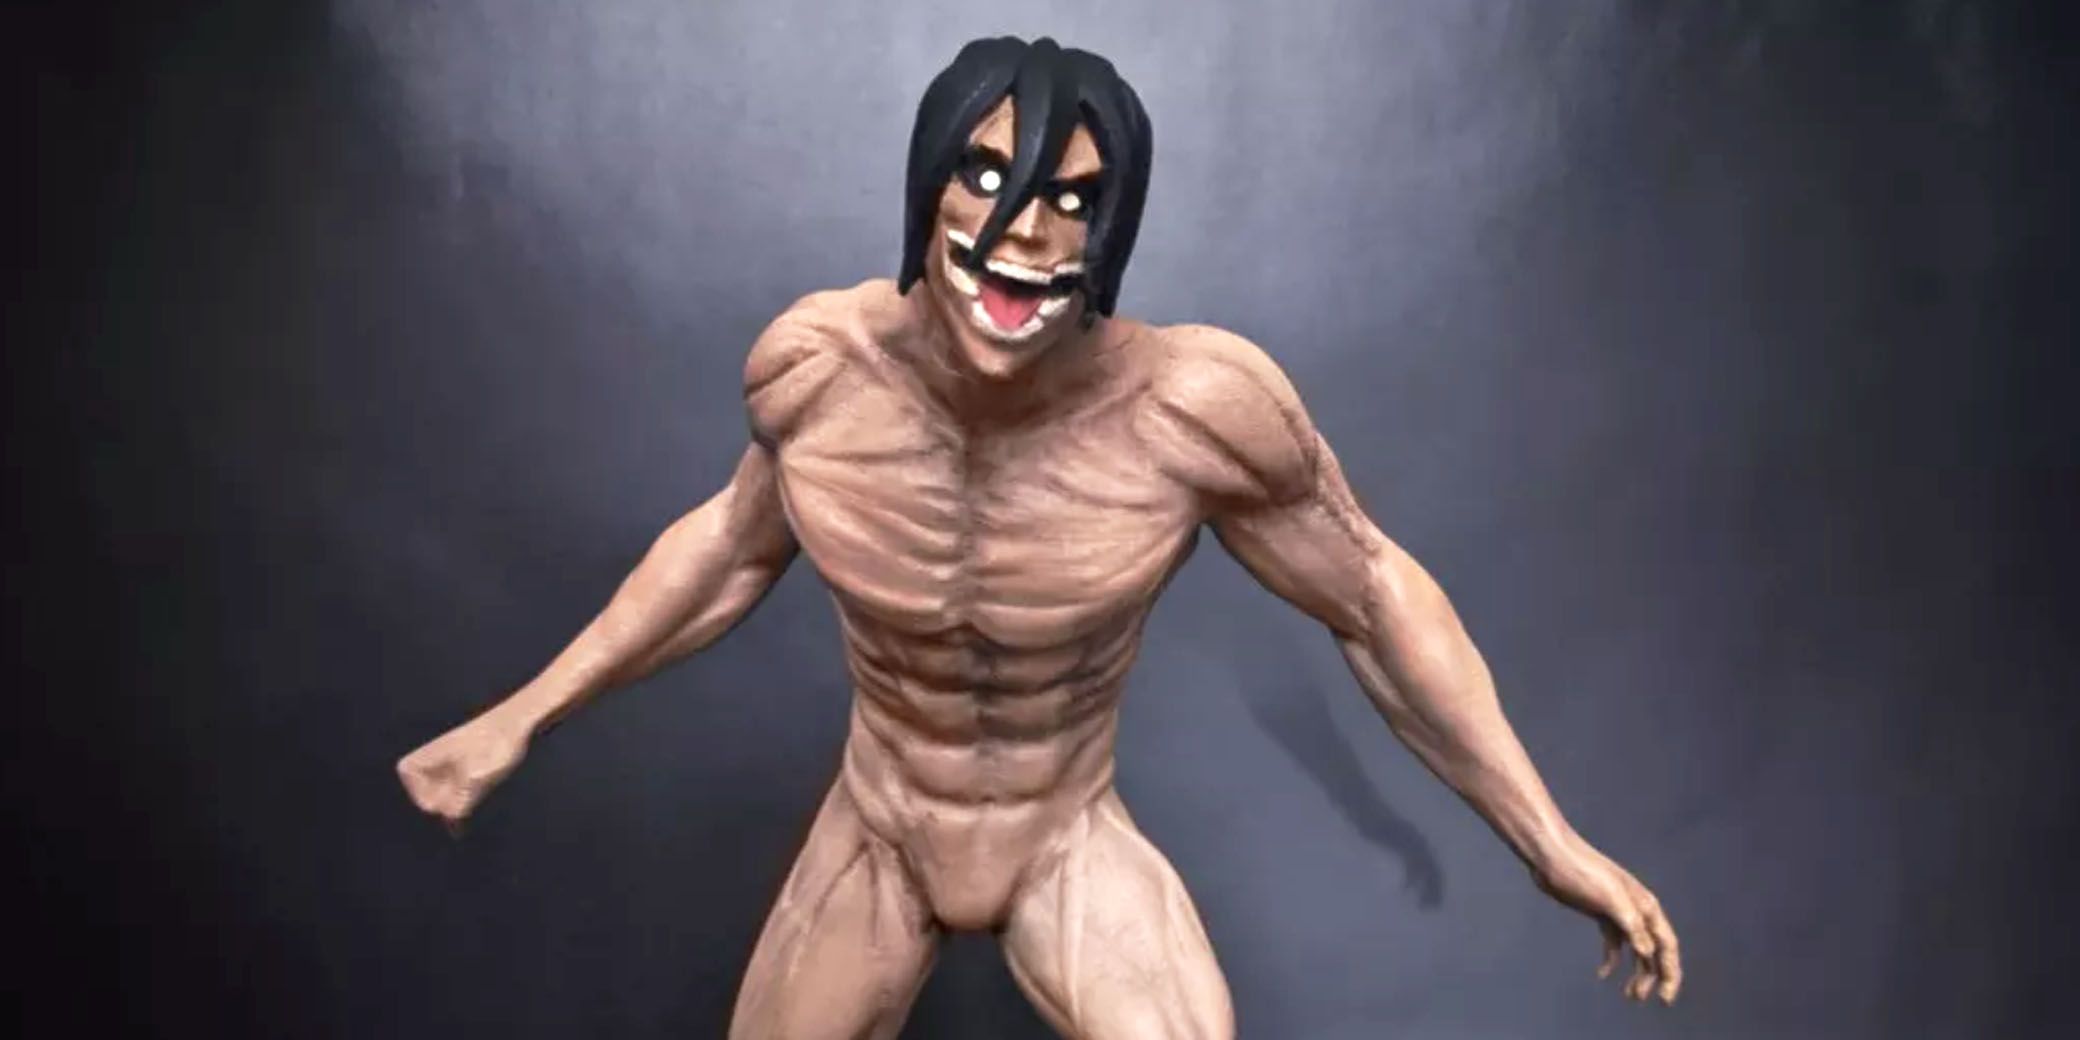 Find here a selection of the best 3D models from the Attack on Titan - Shingeki No Kyojin universe